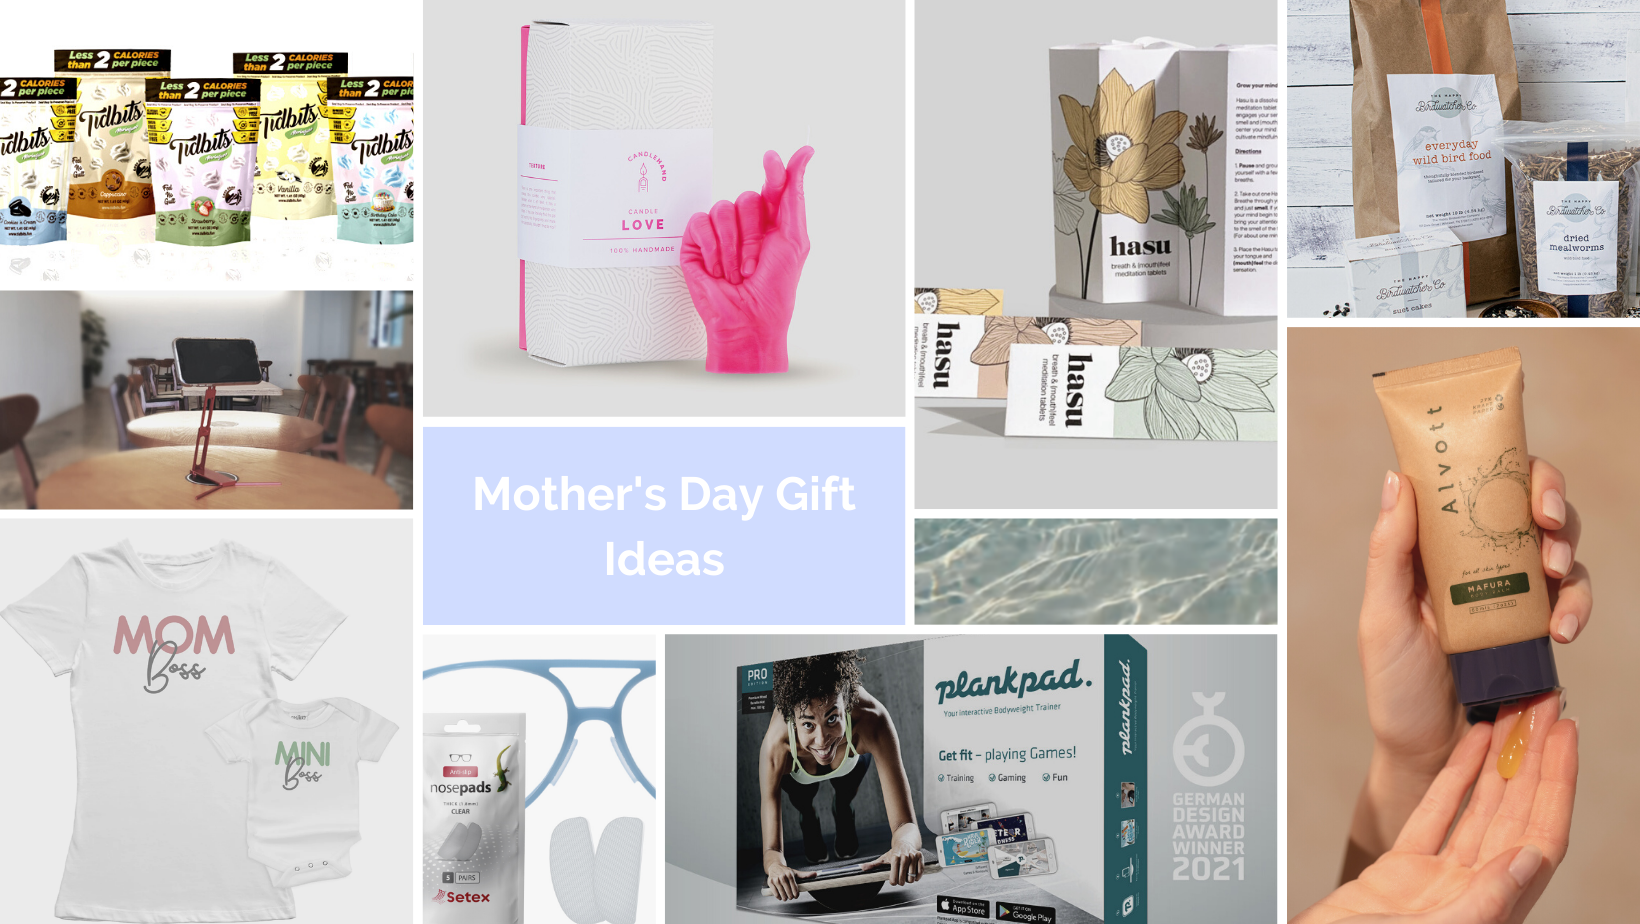 Mother's Day Gift Ideas 2023